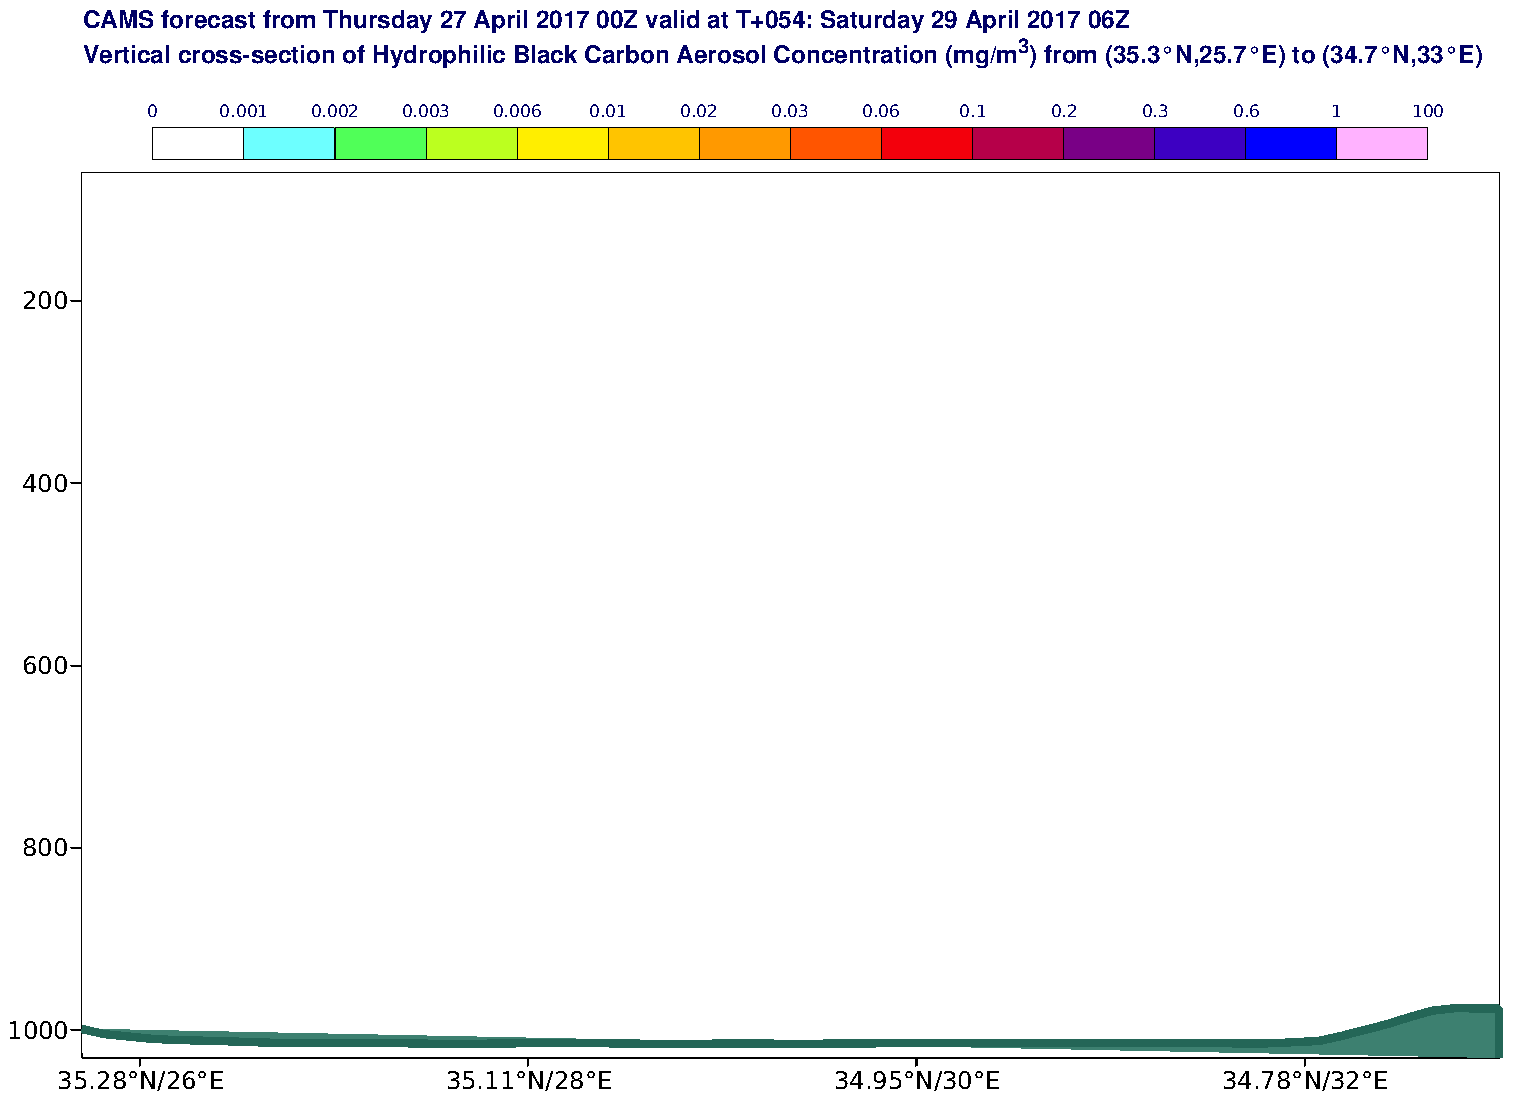 Vertical cross-section of Hydrophilic Black Carbon Aerosol Concentration (mg/m3) valid at T54 - 2017-04-29 06:00